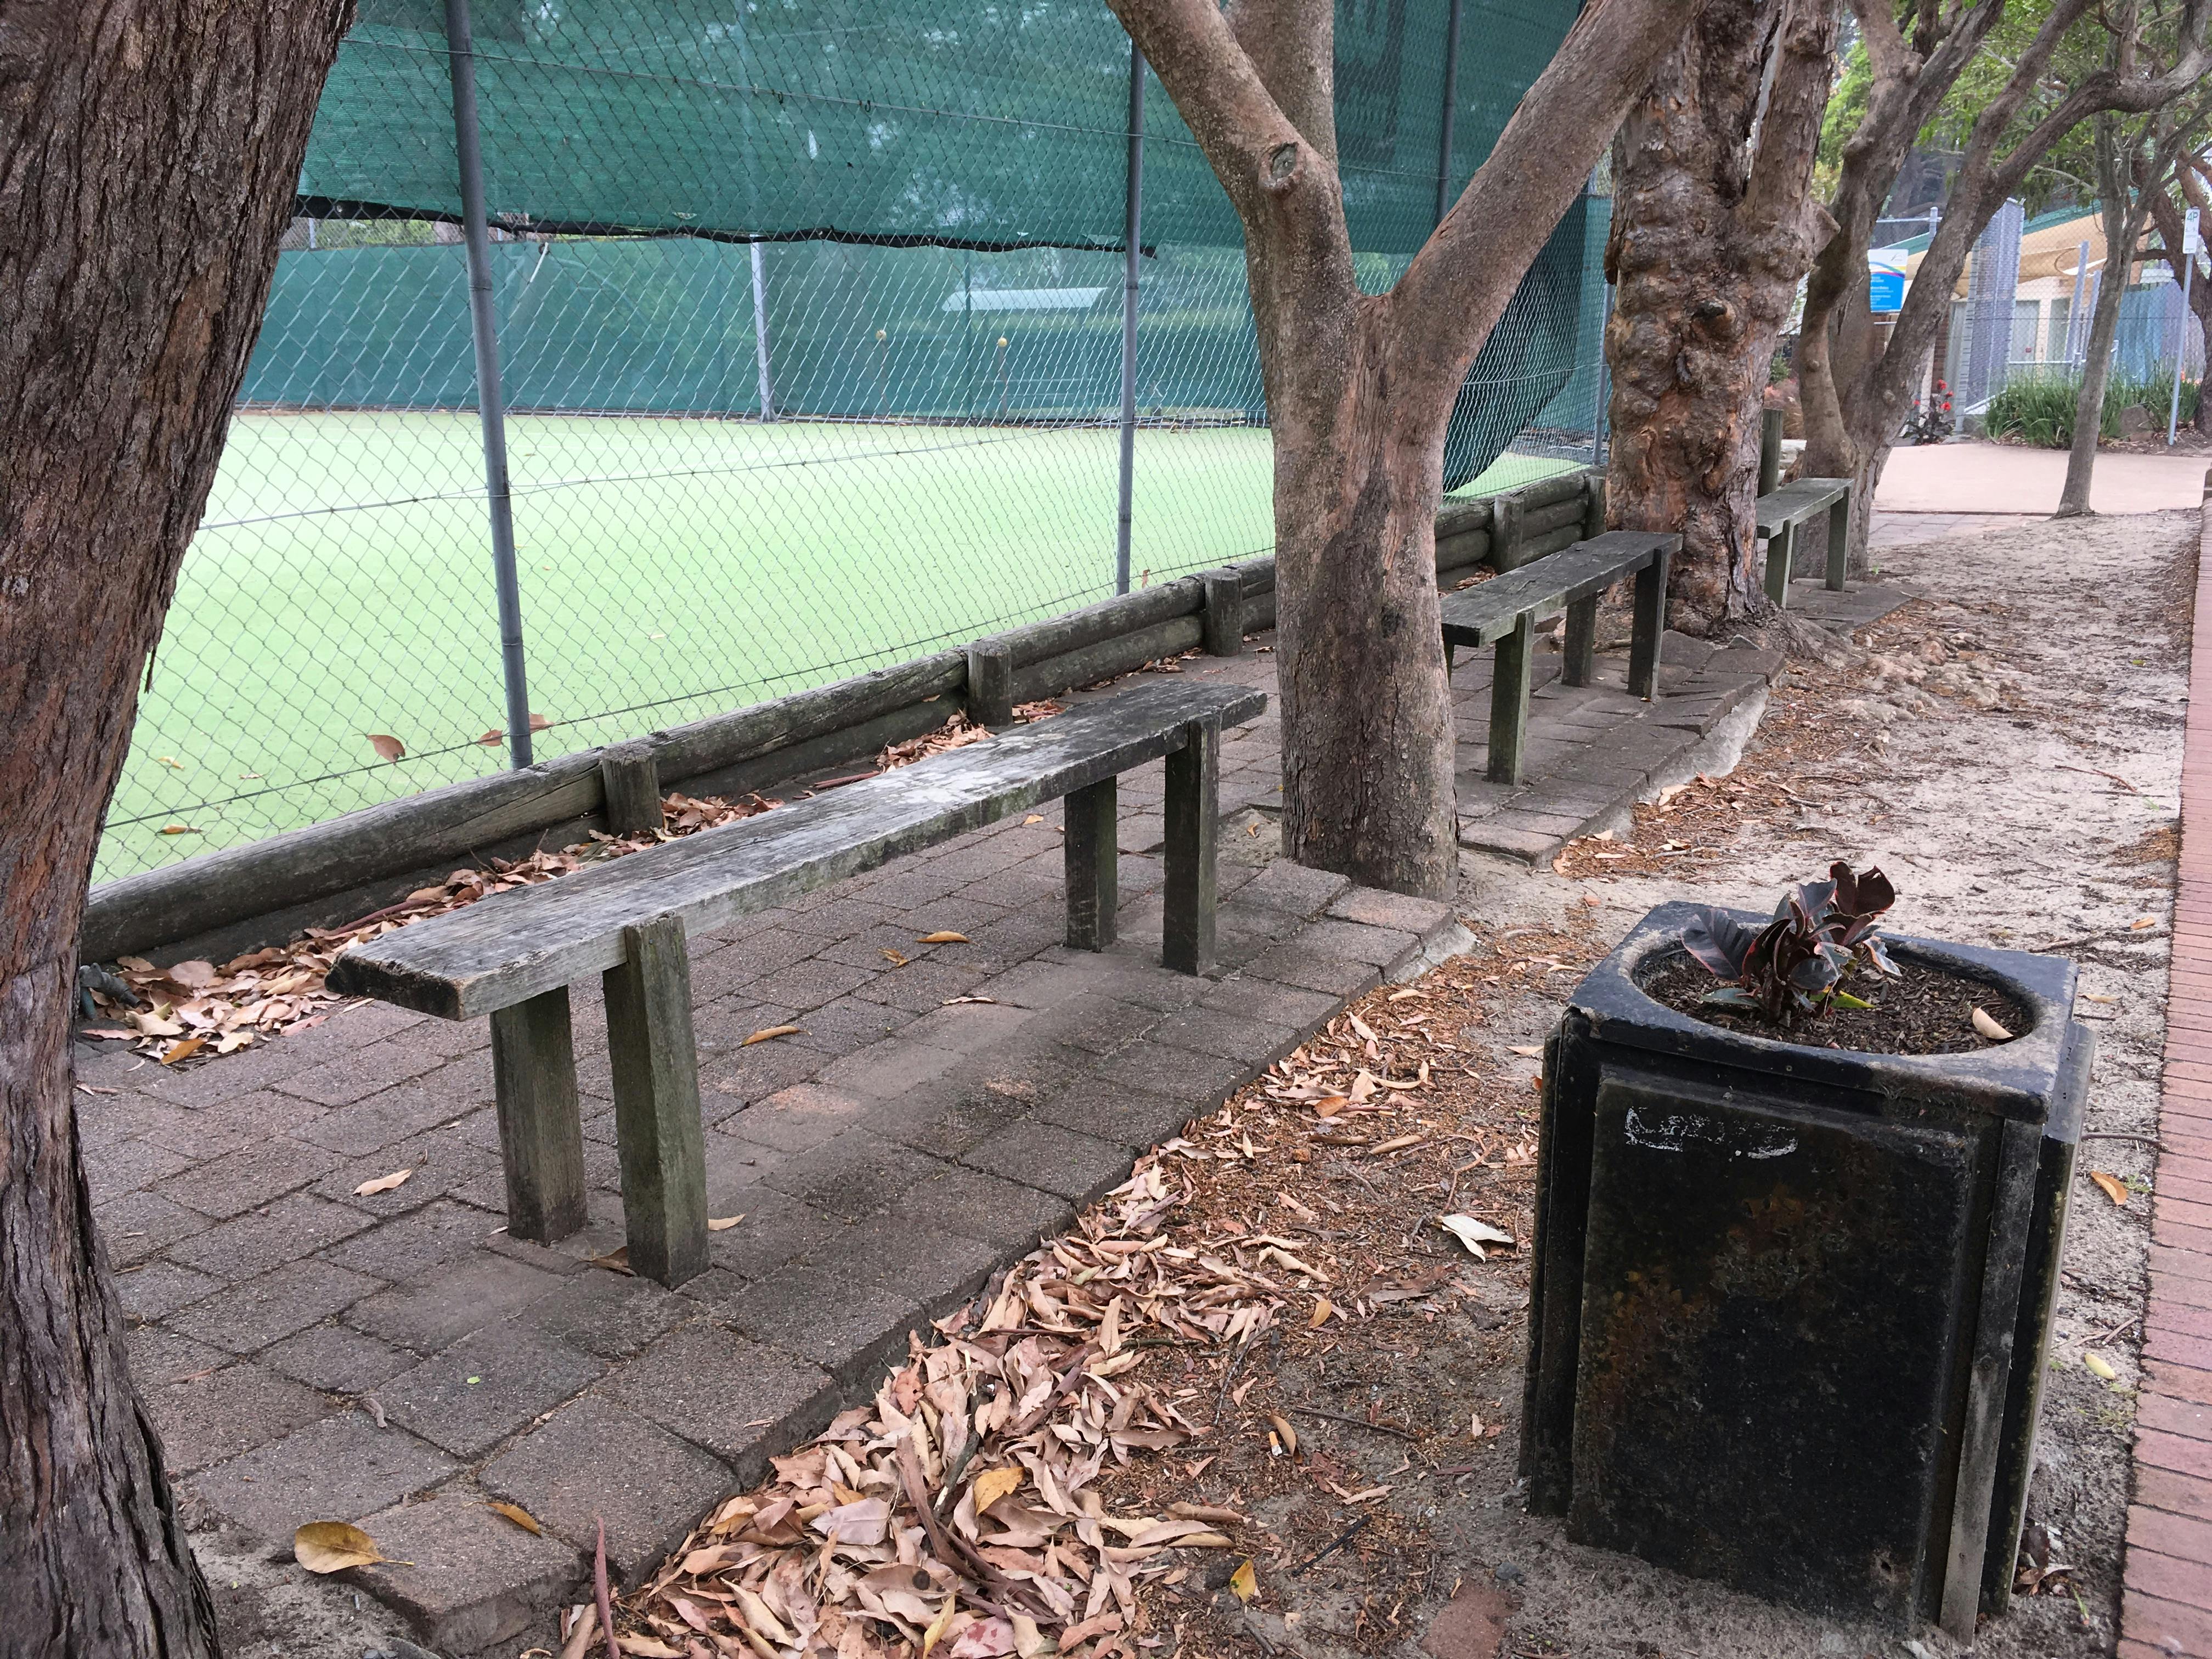 Benches near upper courts